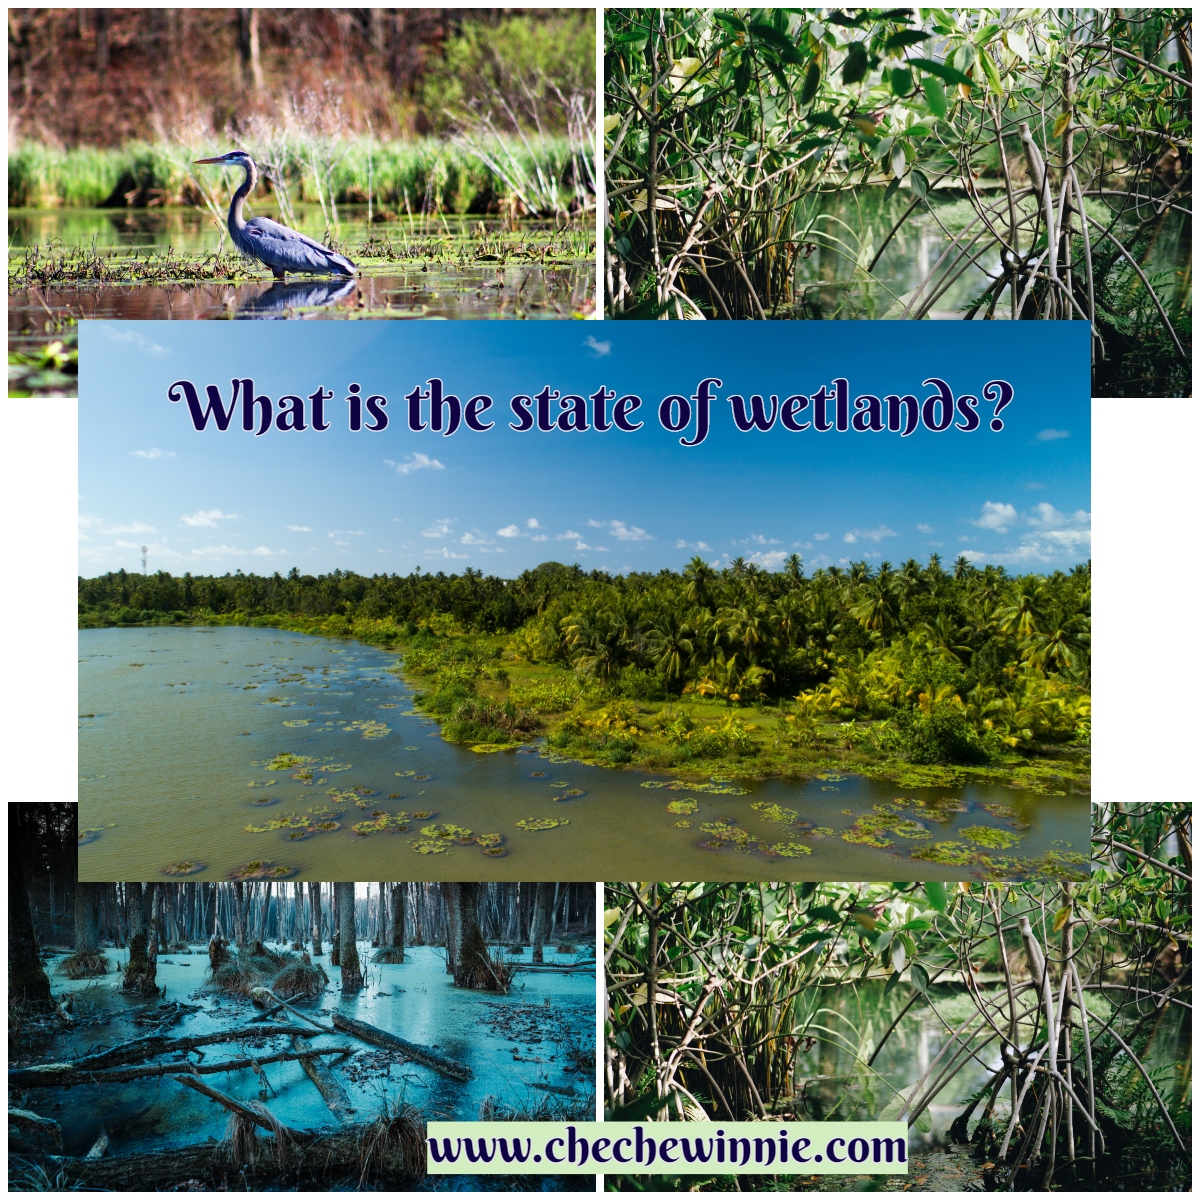 What is the state of wetlands?